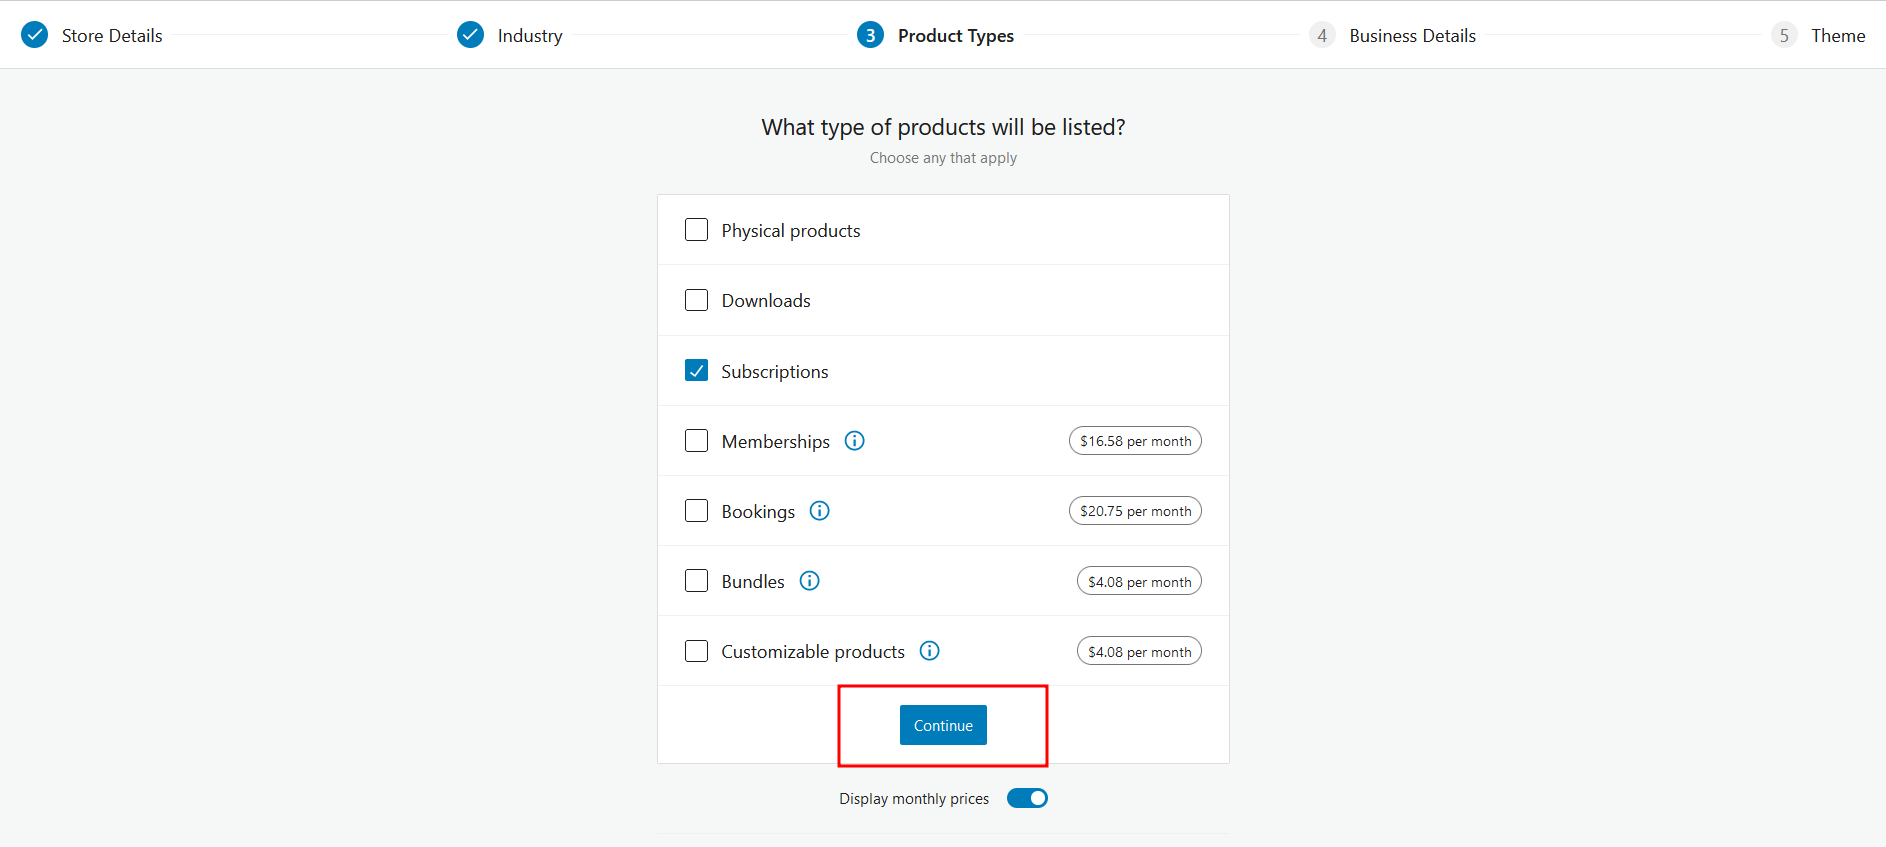 Select the Product Types